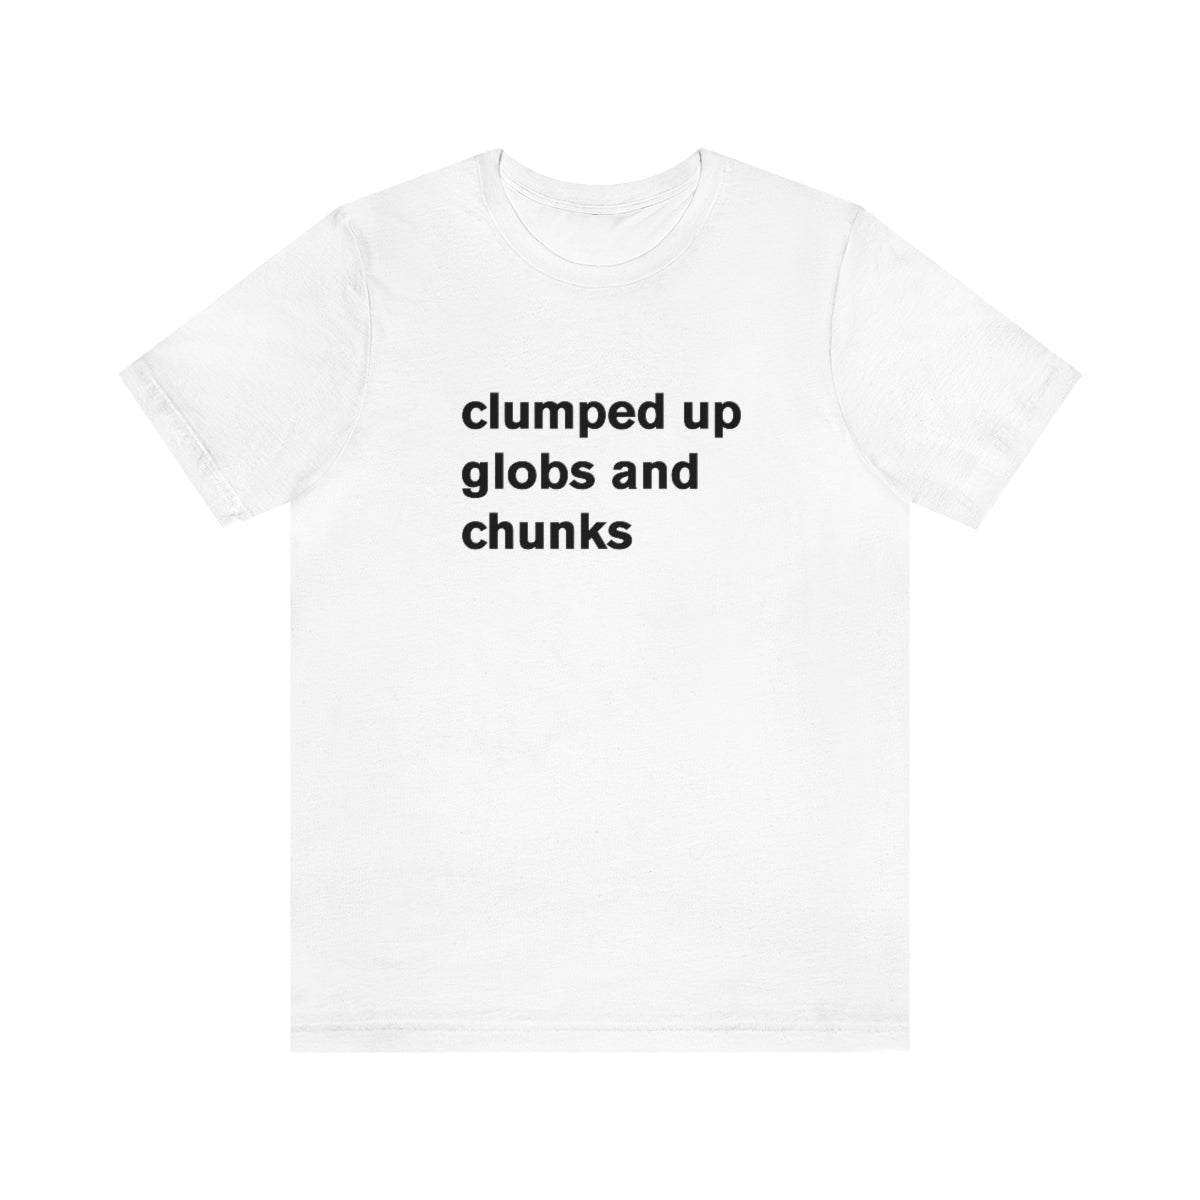 clumped up globs and chunks - t-shirt